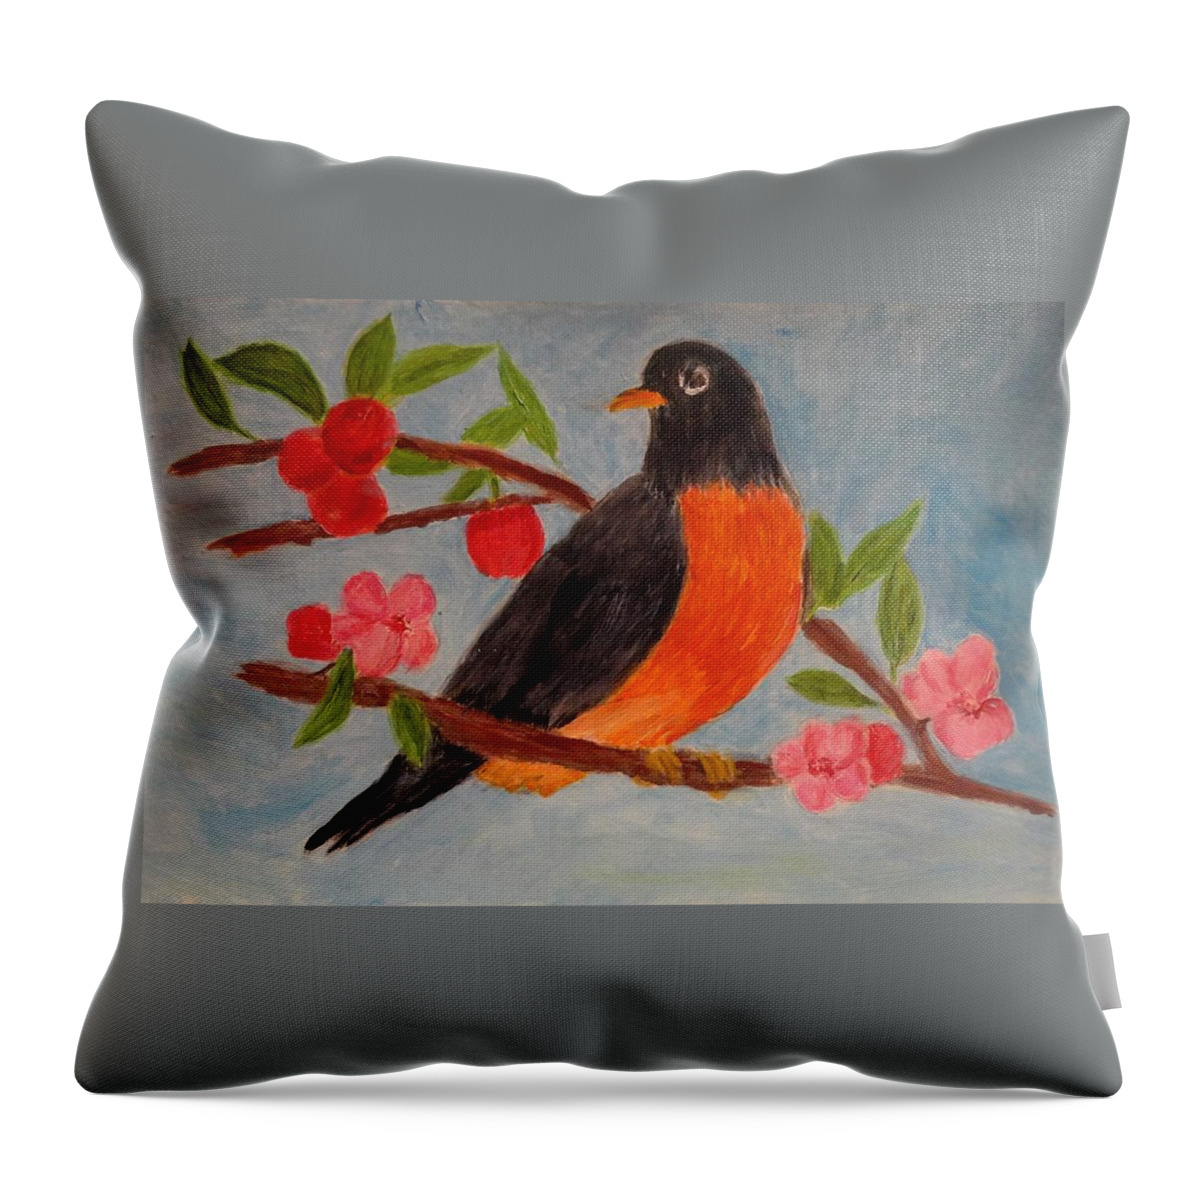 Red Breast Robin Throw Pillow featuring the painting Red Breast Robin  by Rosie Foshee